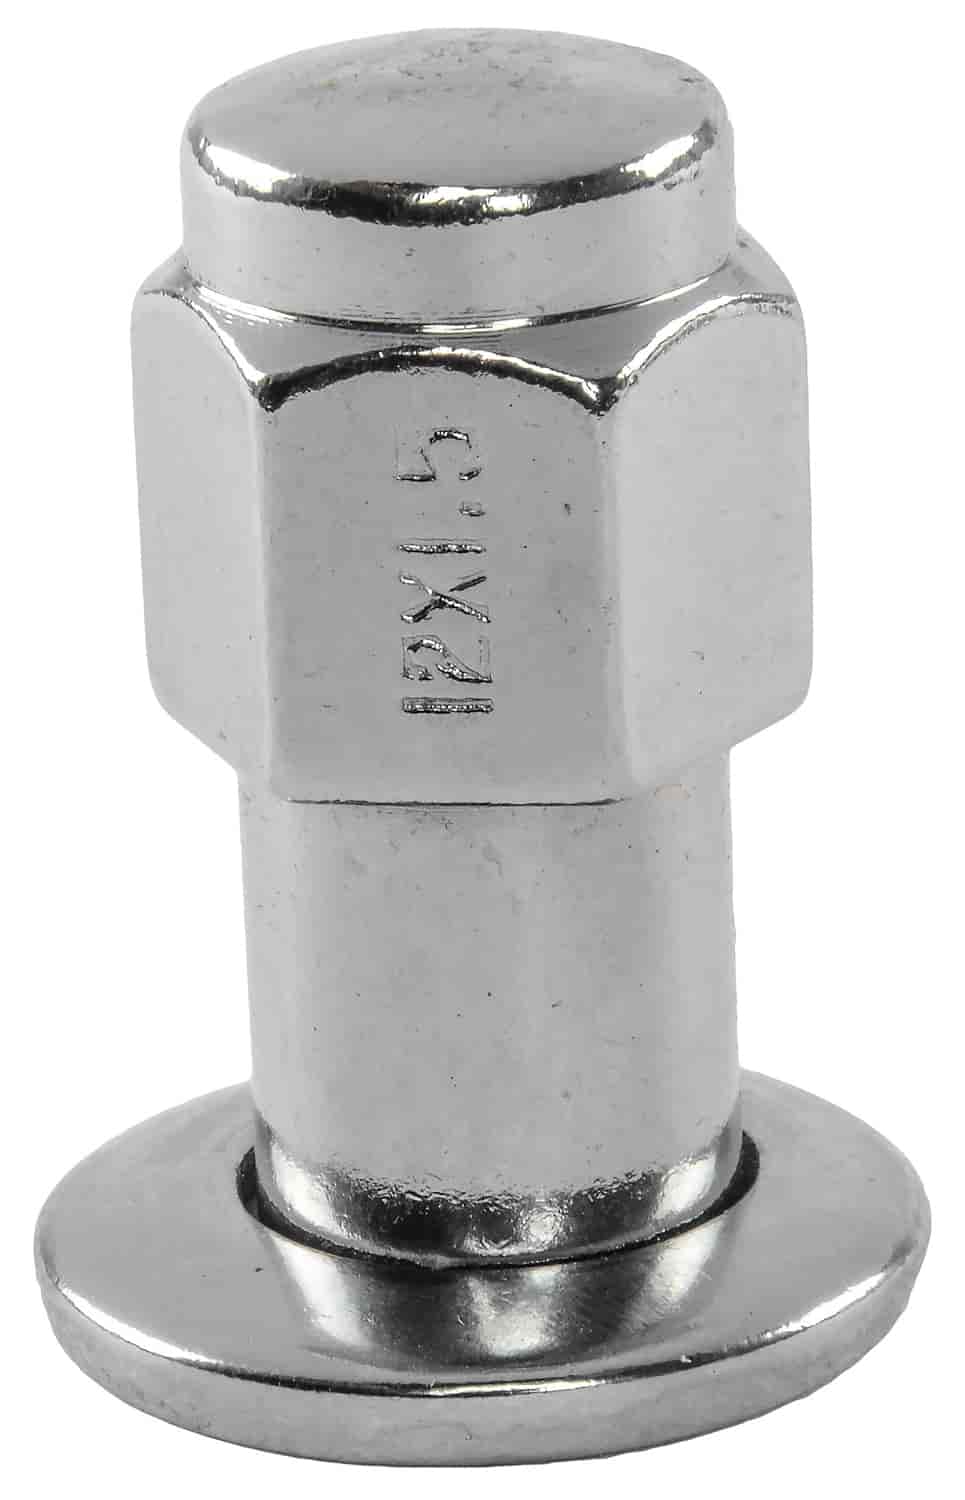 Standard Mag Lug Nuts, Closed-End with Off-Center Washers [12mm x 1.5 RH, .850 in. Shank, Chrome]